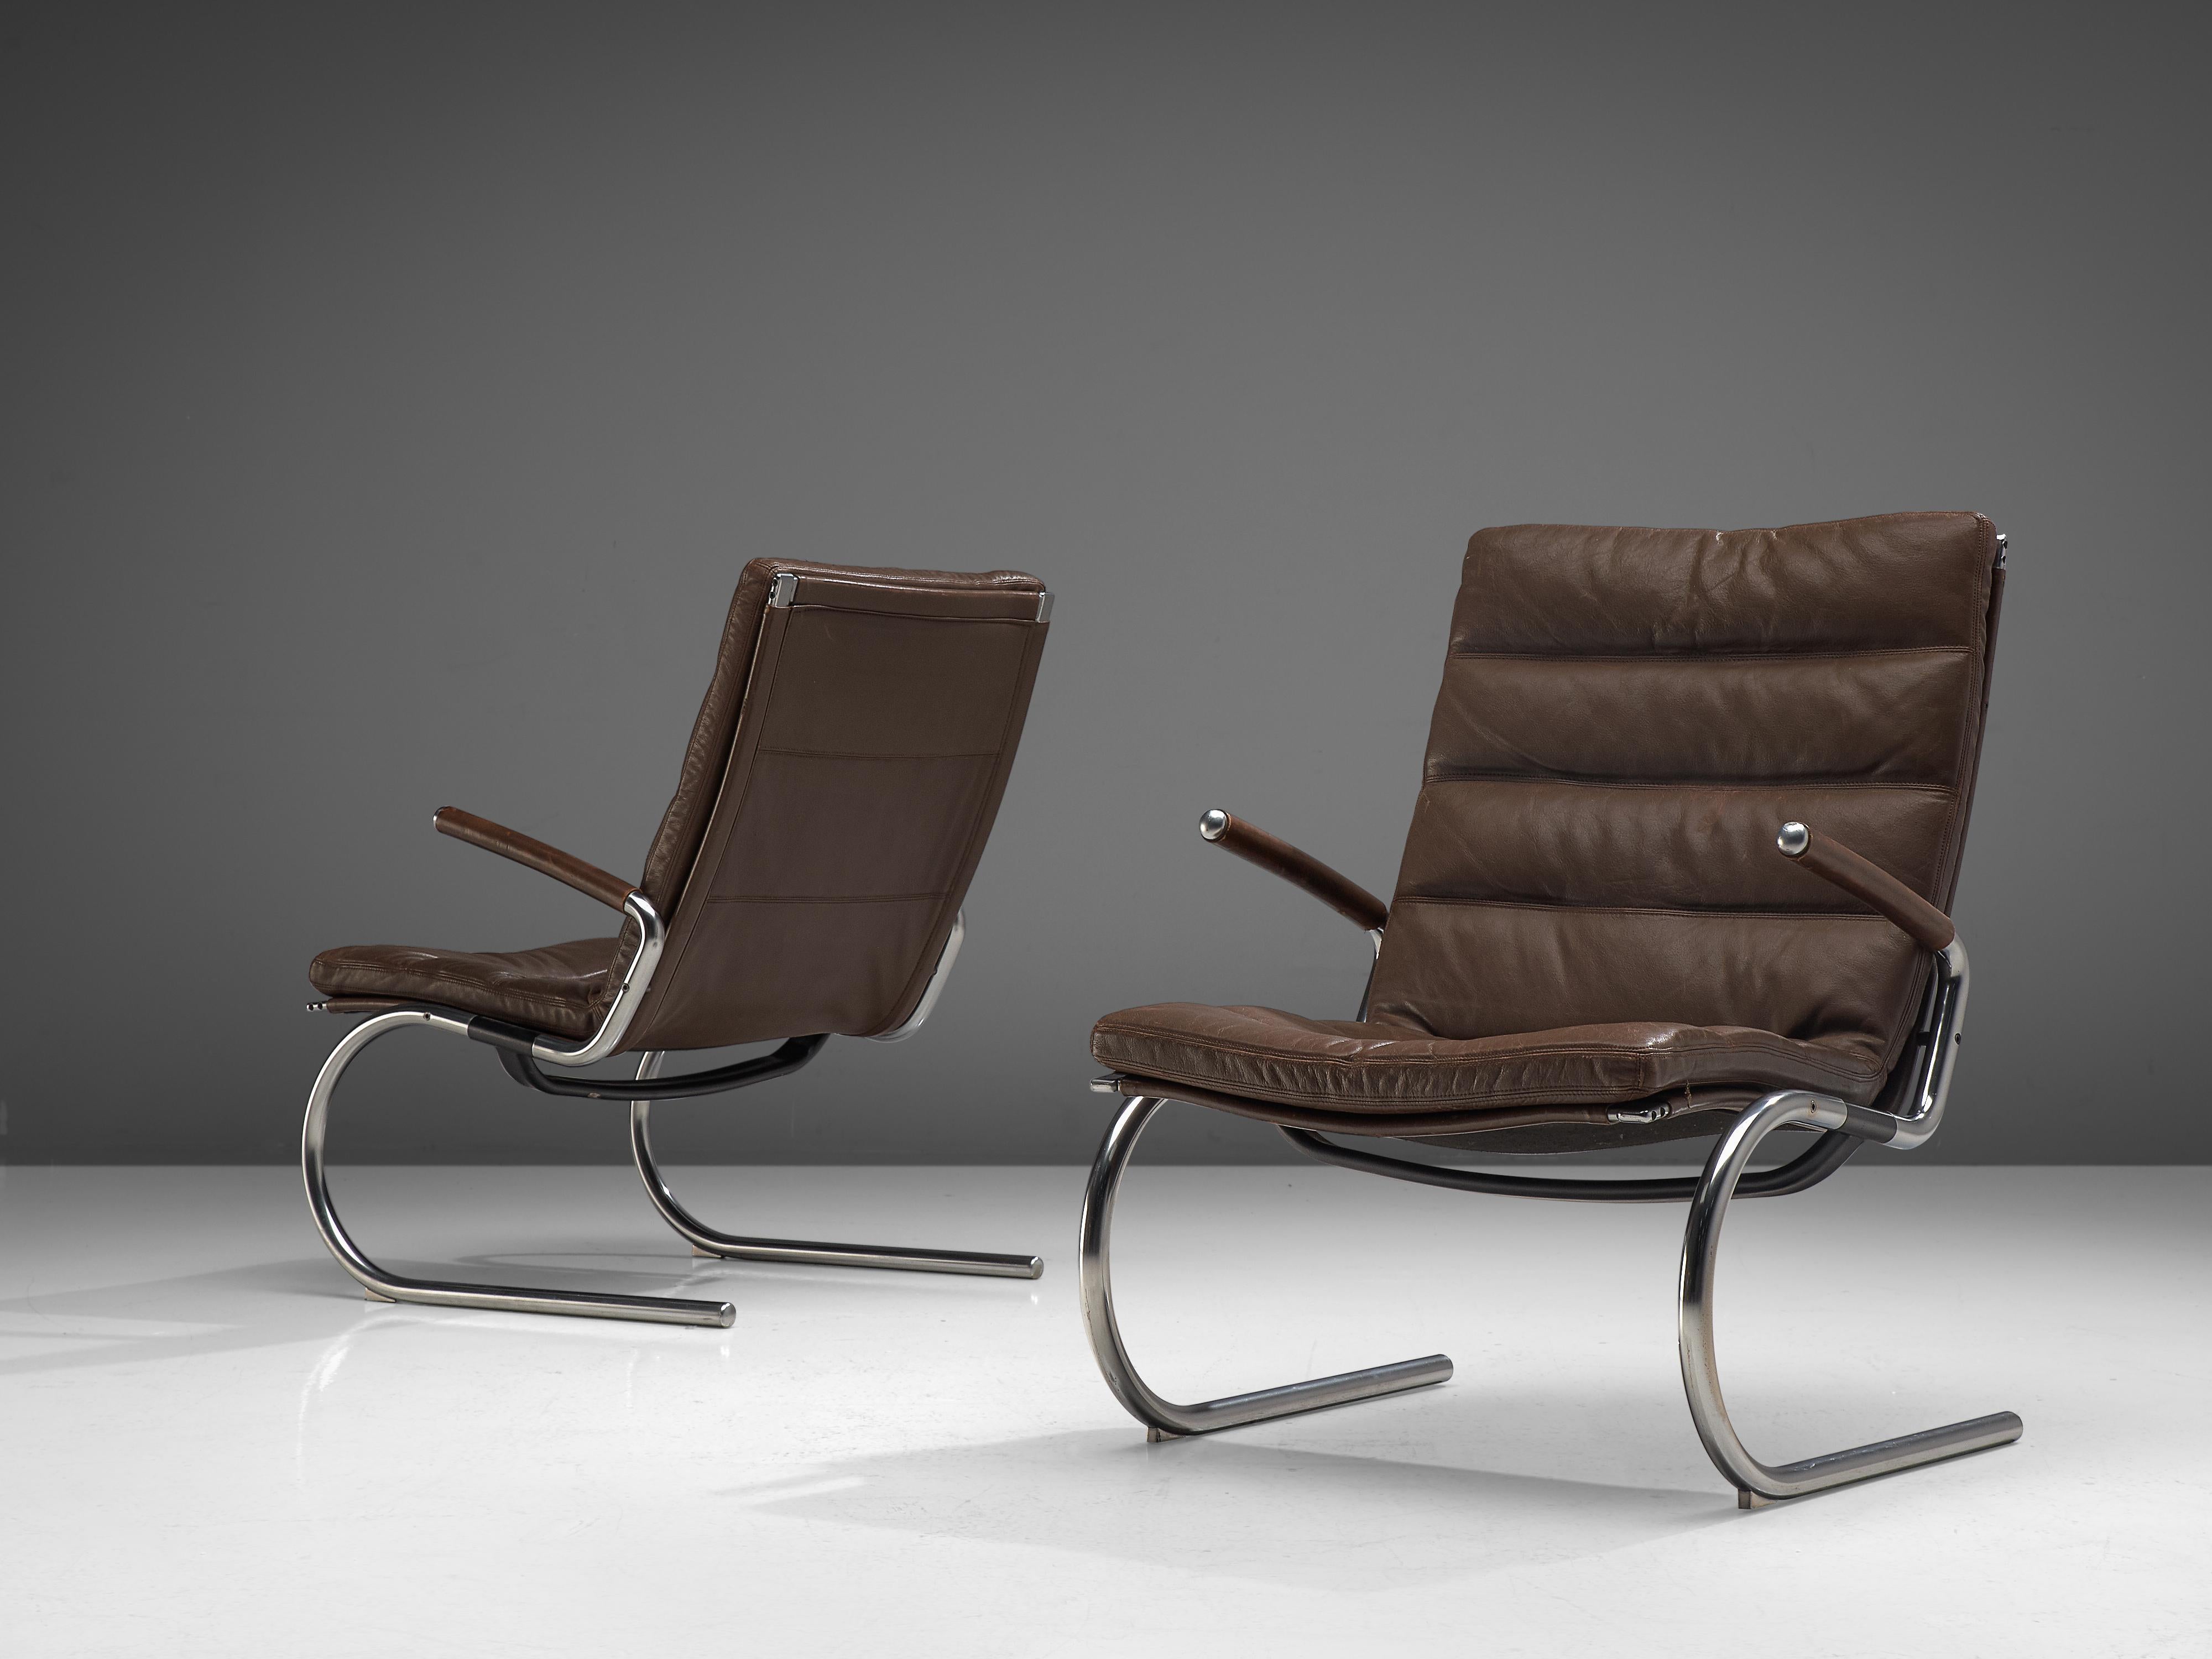 Jørgen Kastholm, pair of lounge chairs, metal and leather, Denmark, 1960s.

This modern pair of armchairs is designed by Jørgen Kastholm in the 1960s. They are executed in tubular steel and leather with an L-shaped seating. The legs and armrests